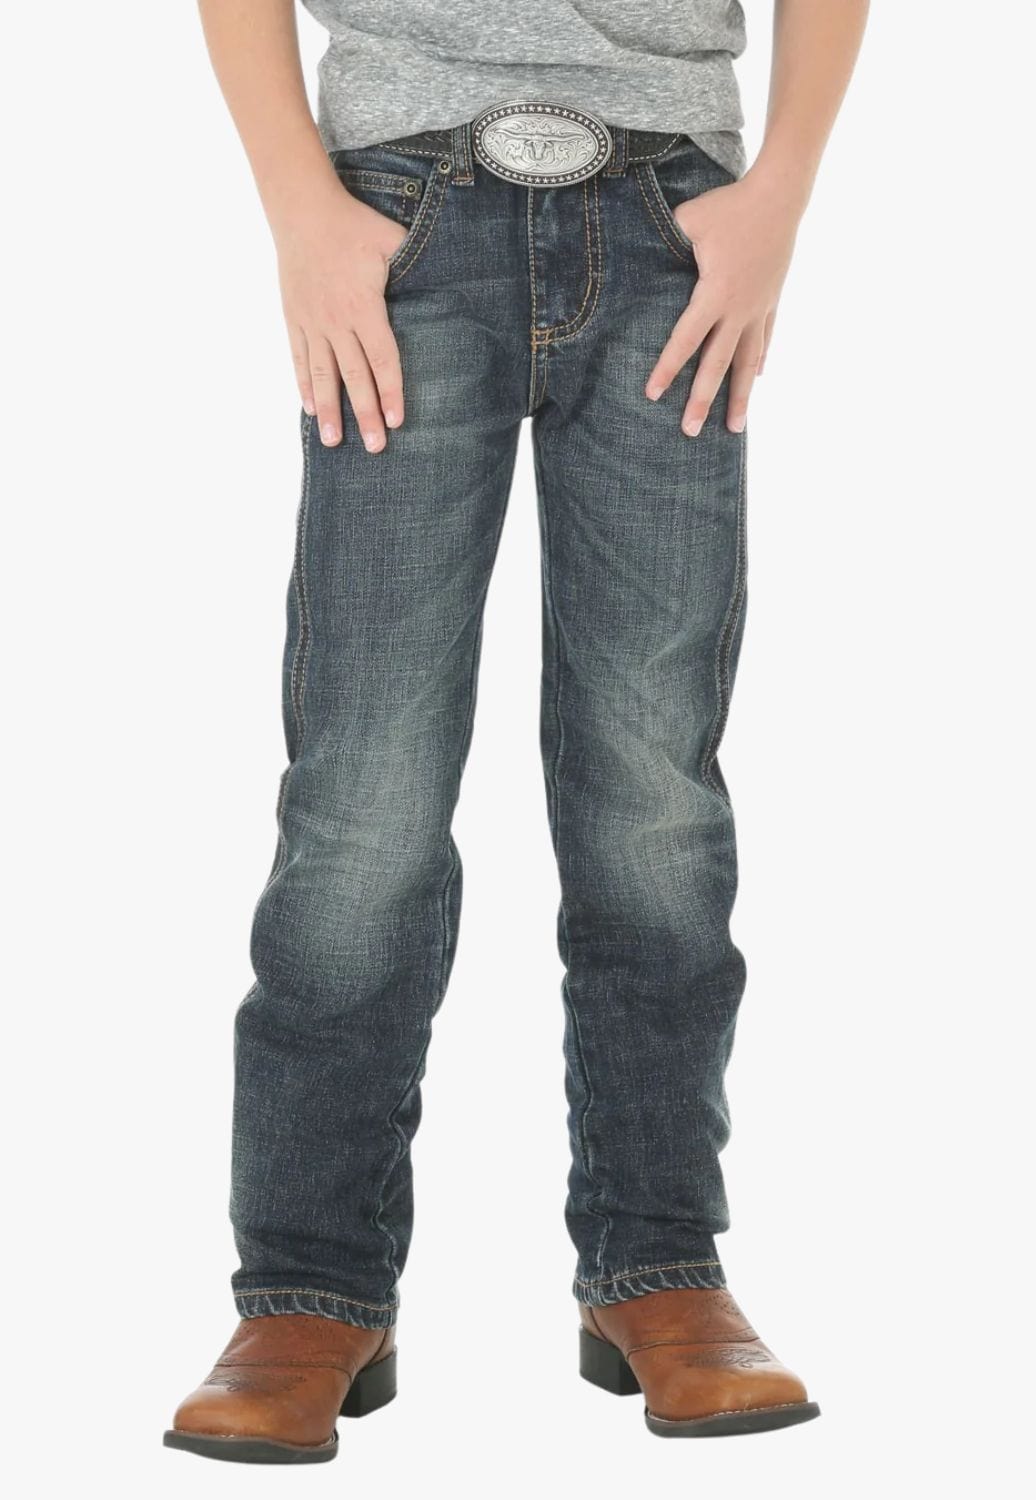 Boy Jeans | Boys Country & Western Jeans - W. Titley & Co